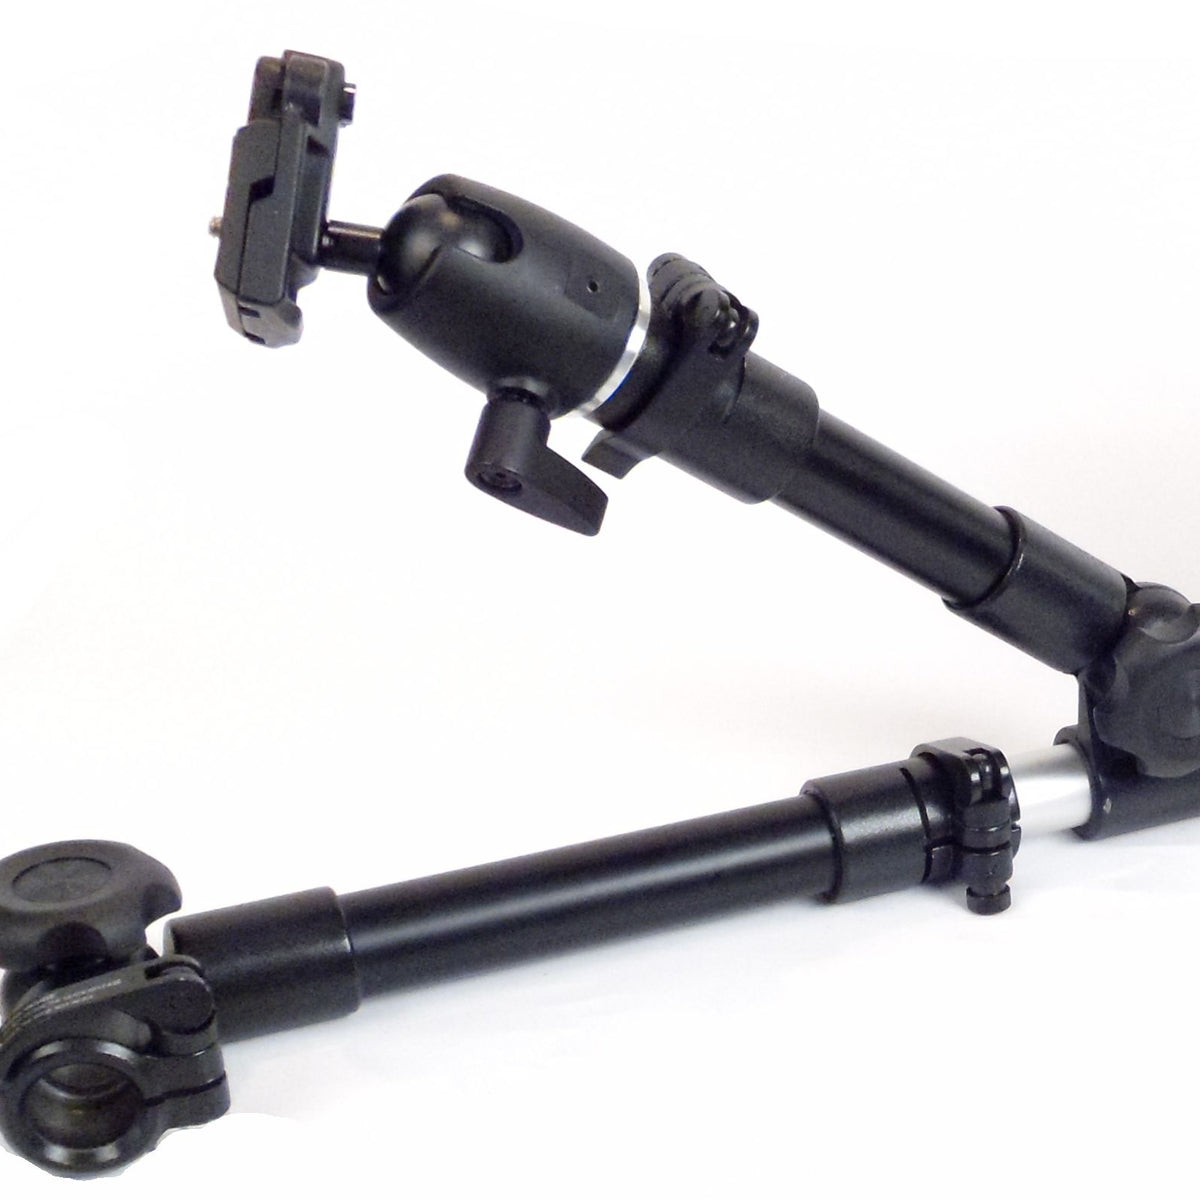 Robo Arm - Arm Part ONLY - requires base & top - Broadened Horizons Direct